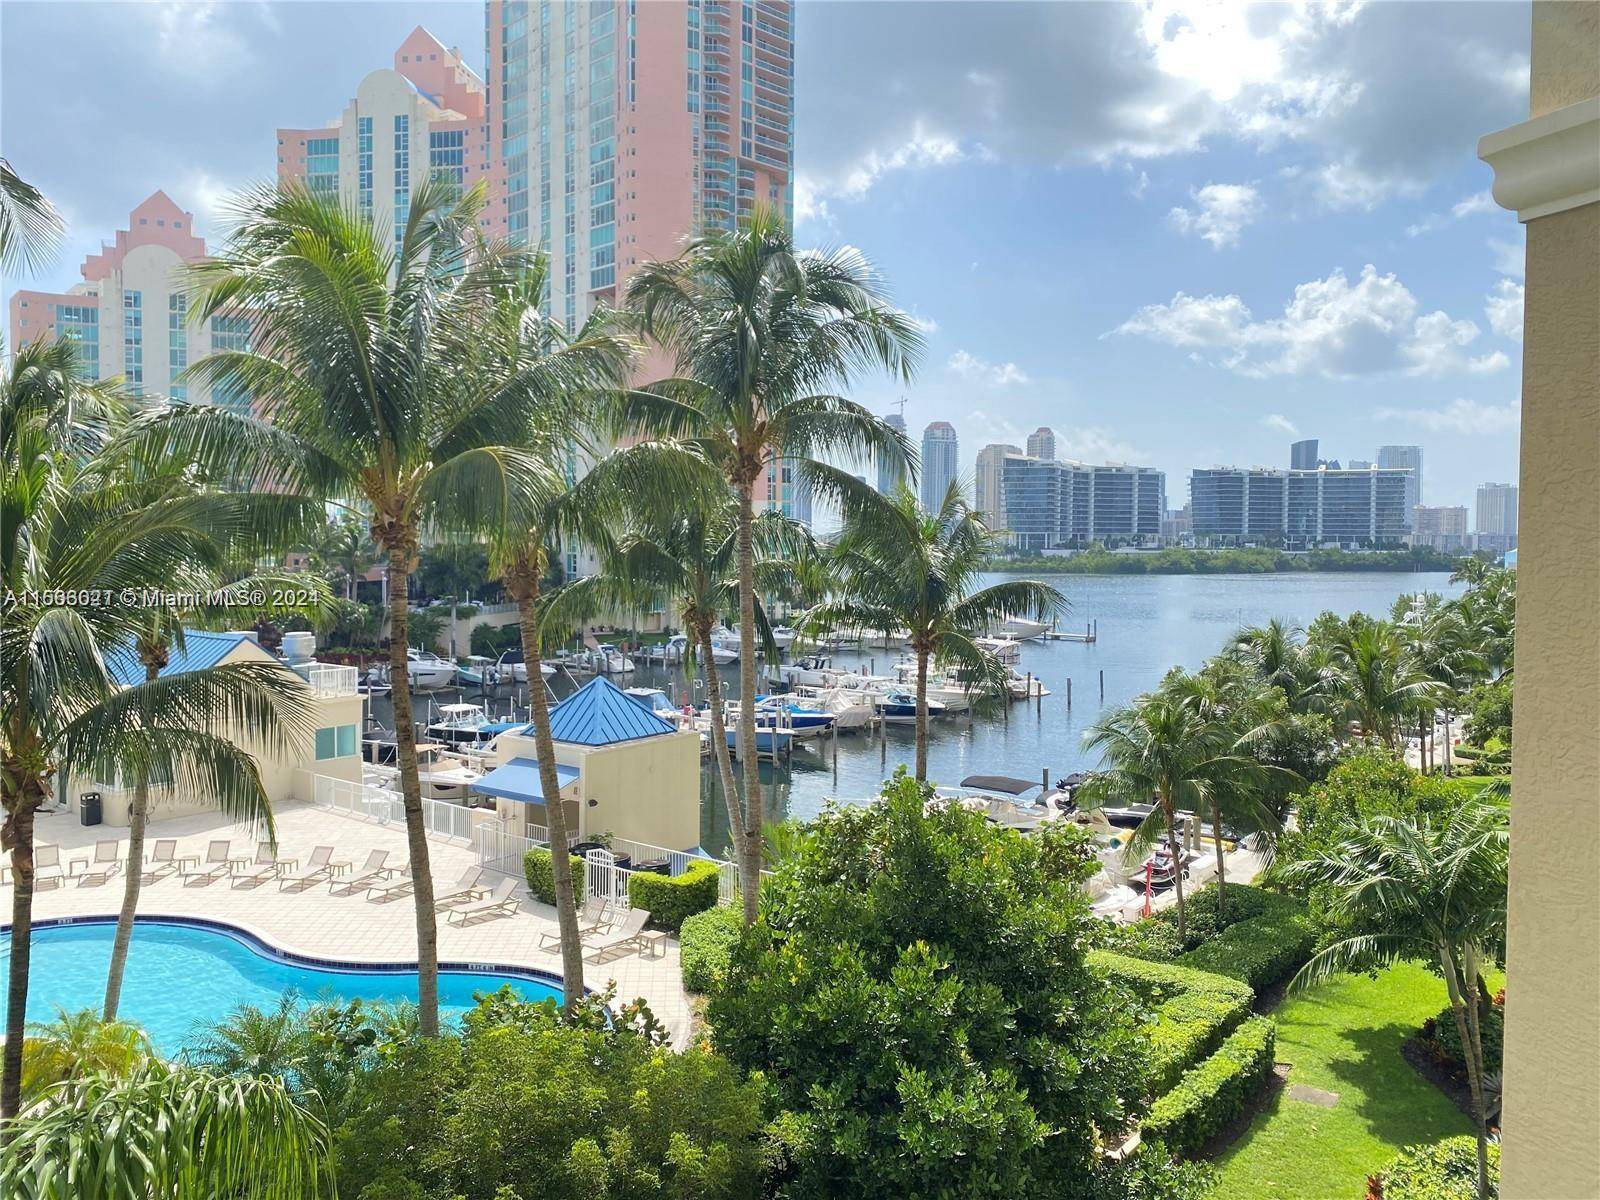 Enjoy spectacular views of the Intracoastal Waterway, the Atlantic Ocean, and the city skyline marina from this fabulous maintained three bedroom, three entire bathroom apartment at desirable Aventura Marina.